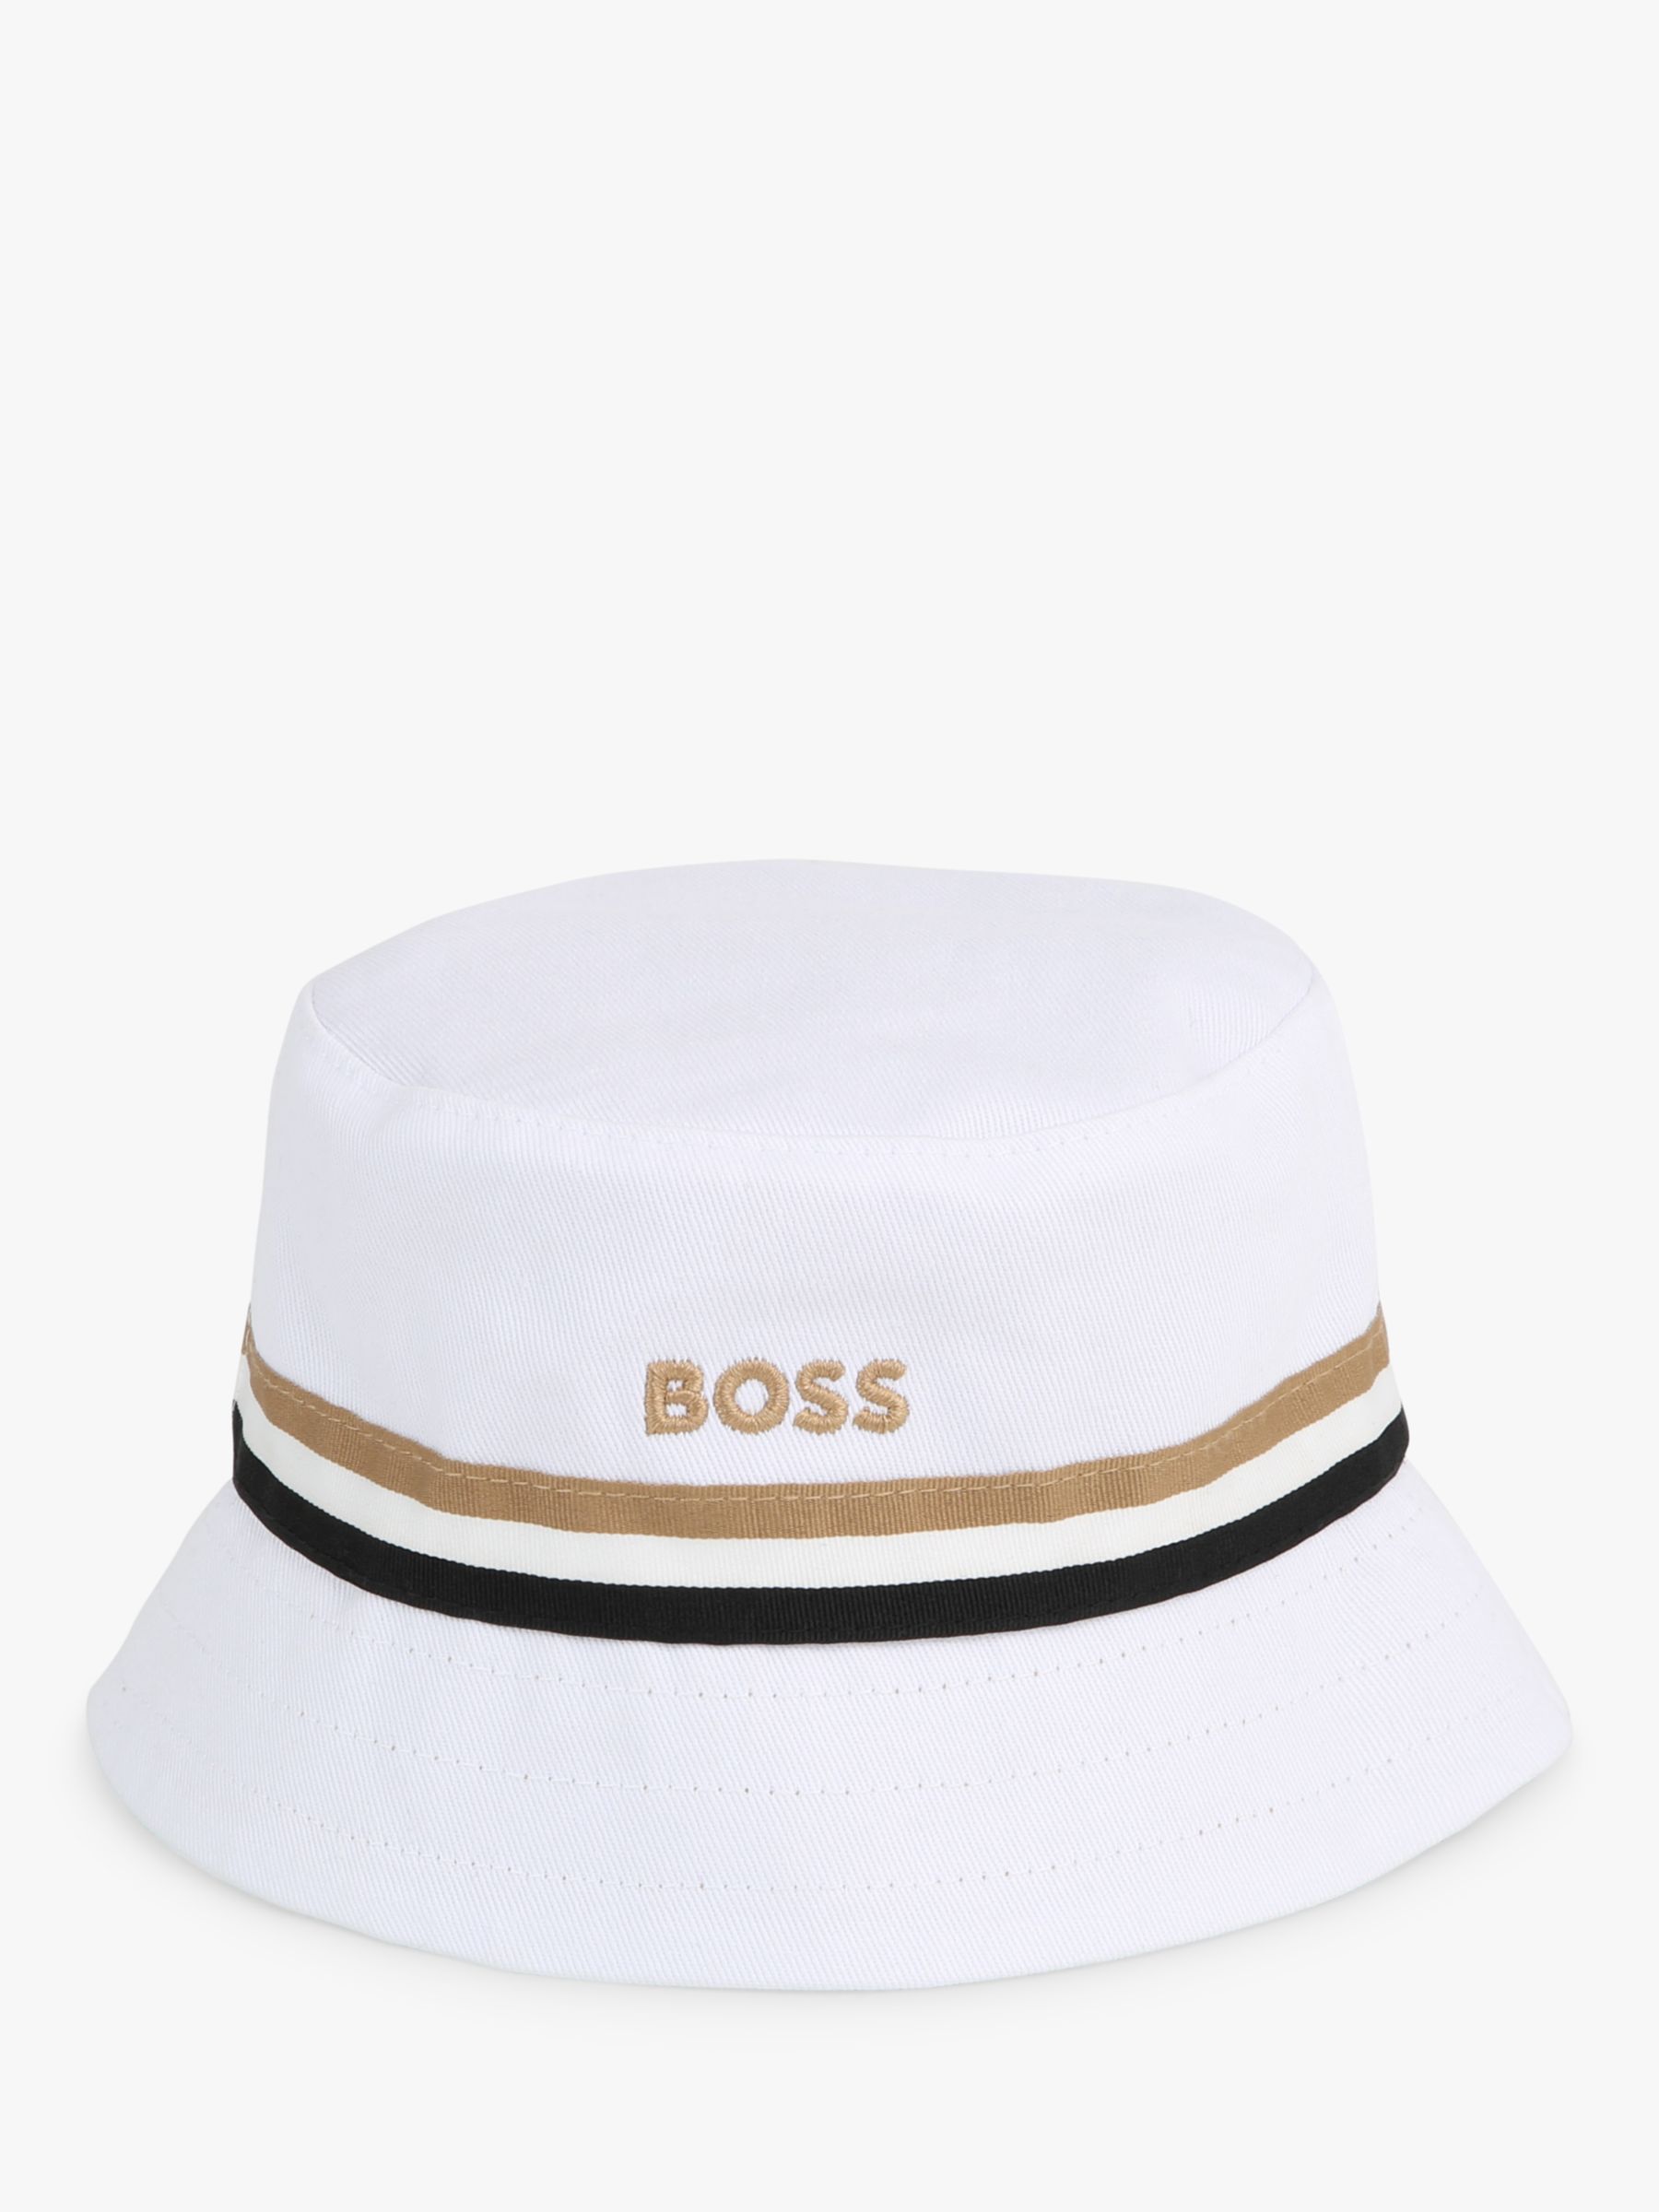 BOSS Baby Reversible Bucket Hat, White/Brown, 9-12 months